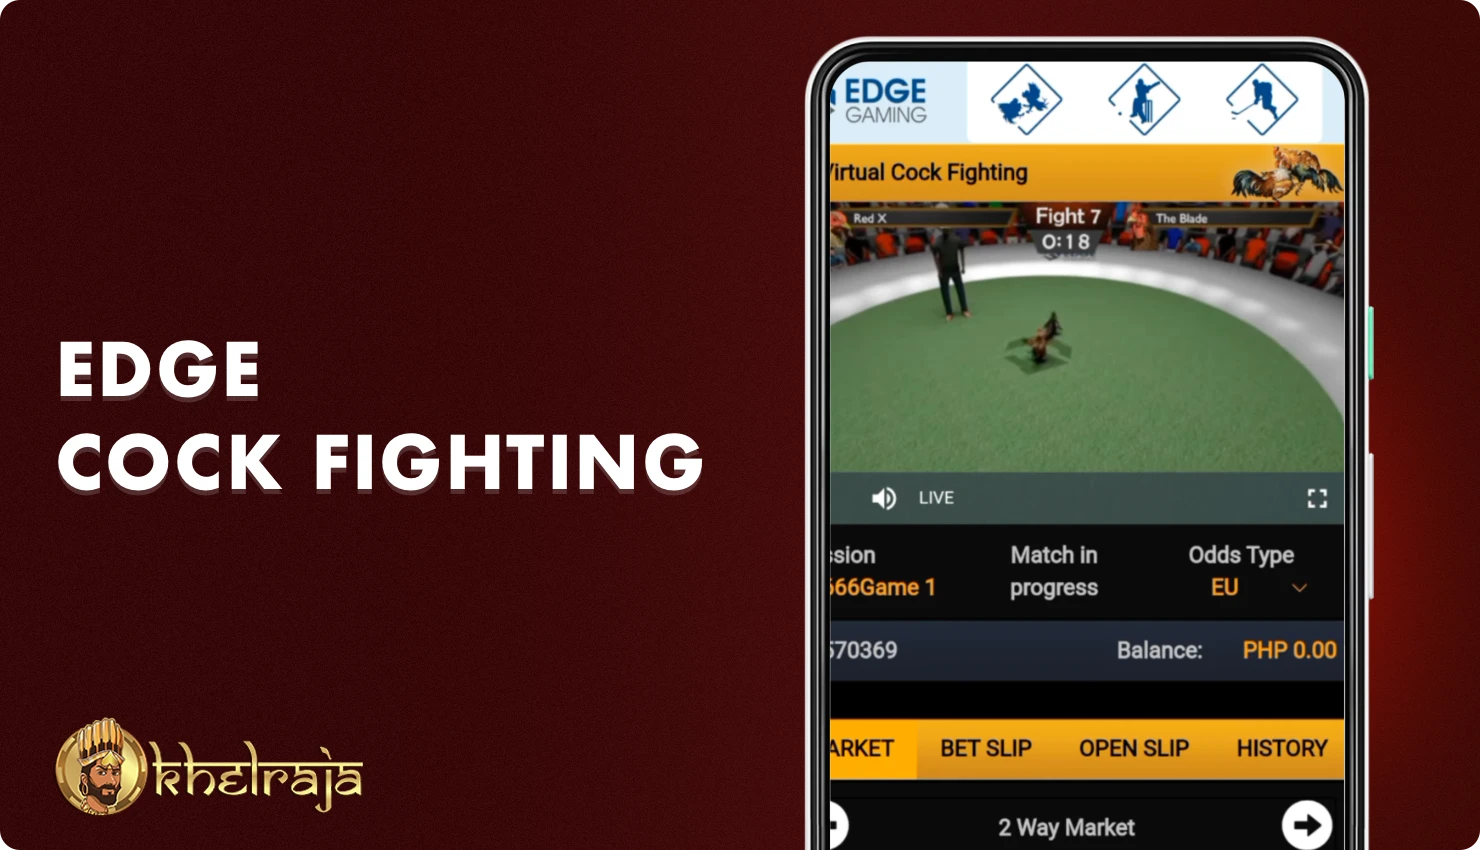 Edge cock fighting in Khelraja is a virtual cockfights on which you can bet